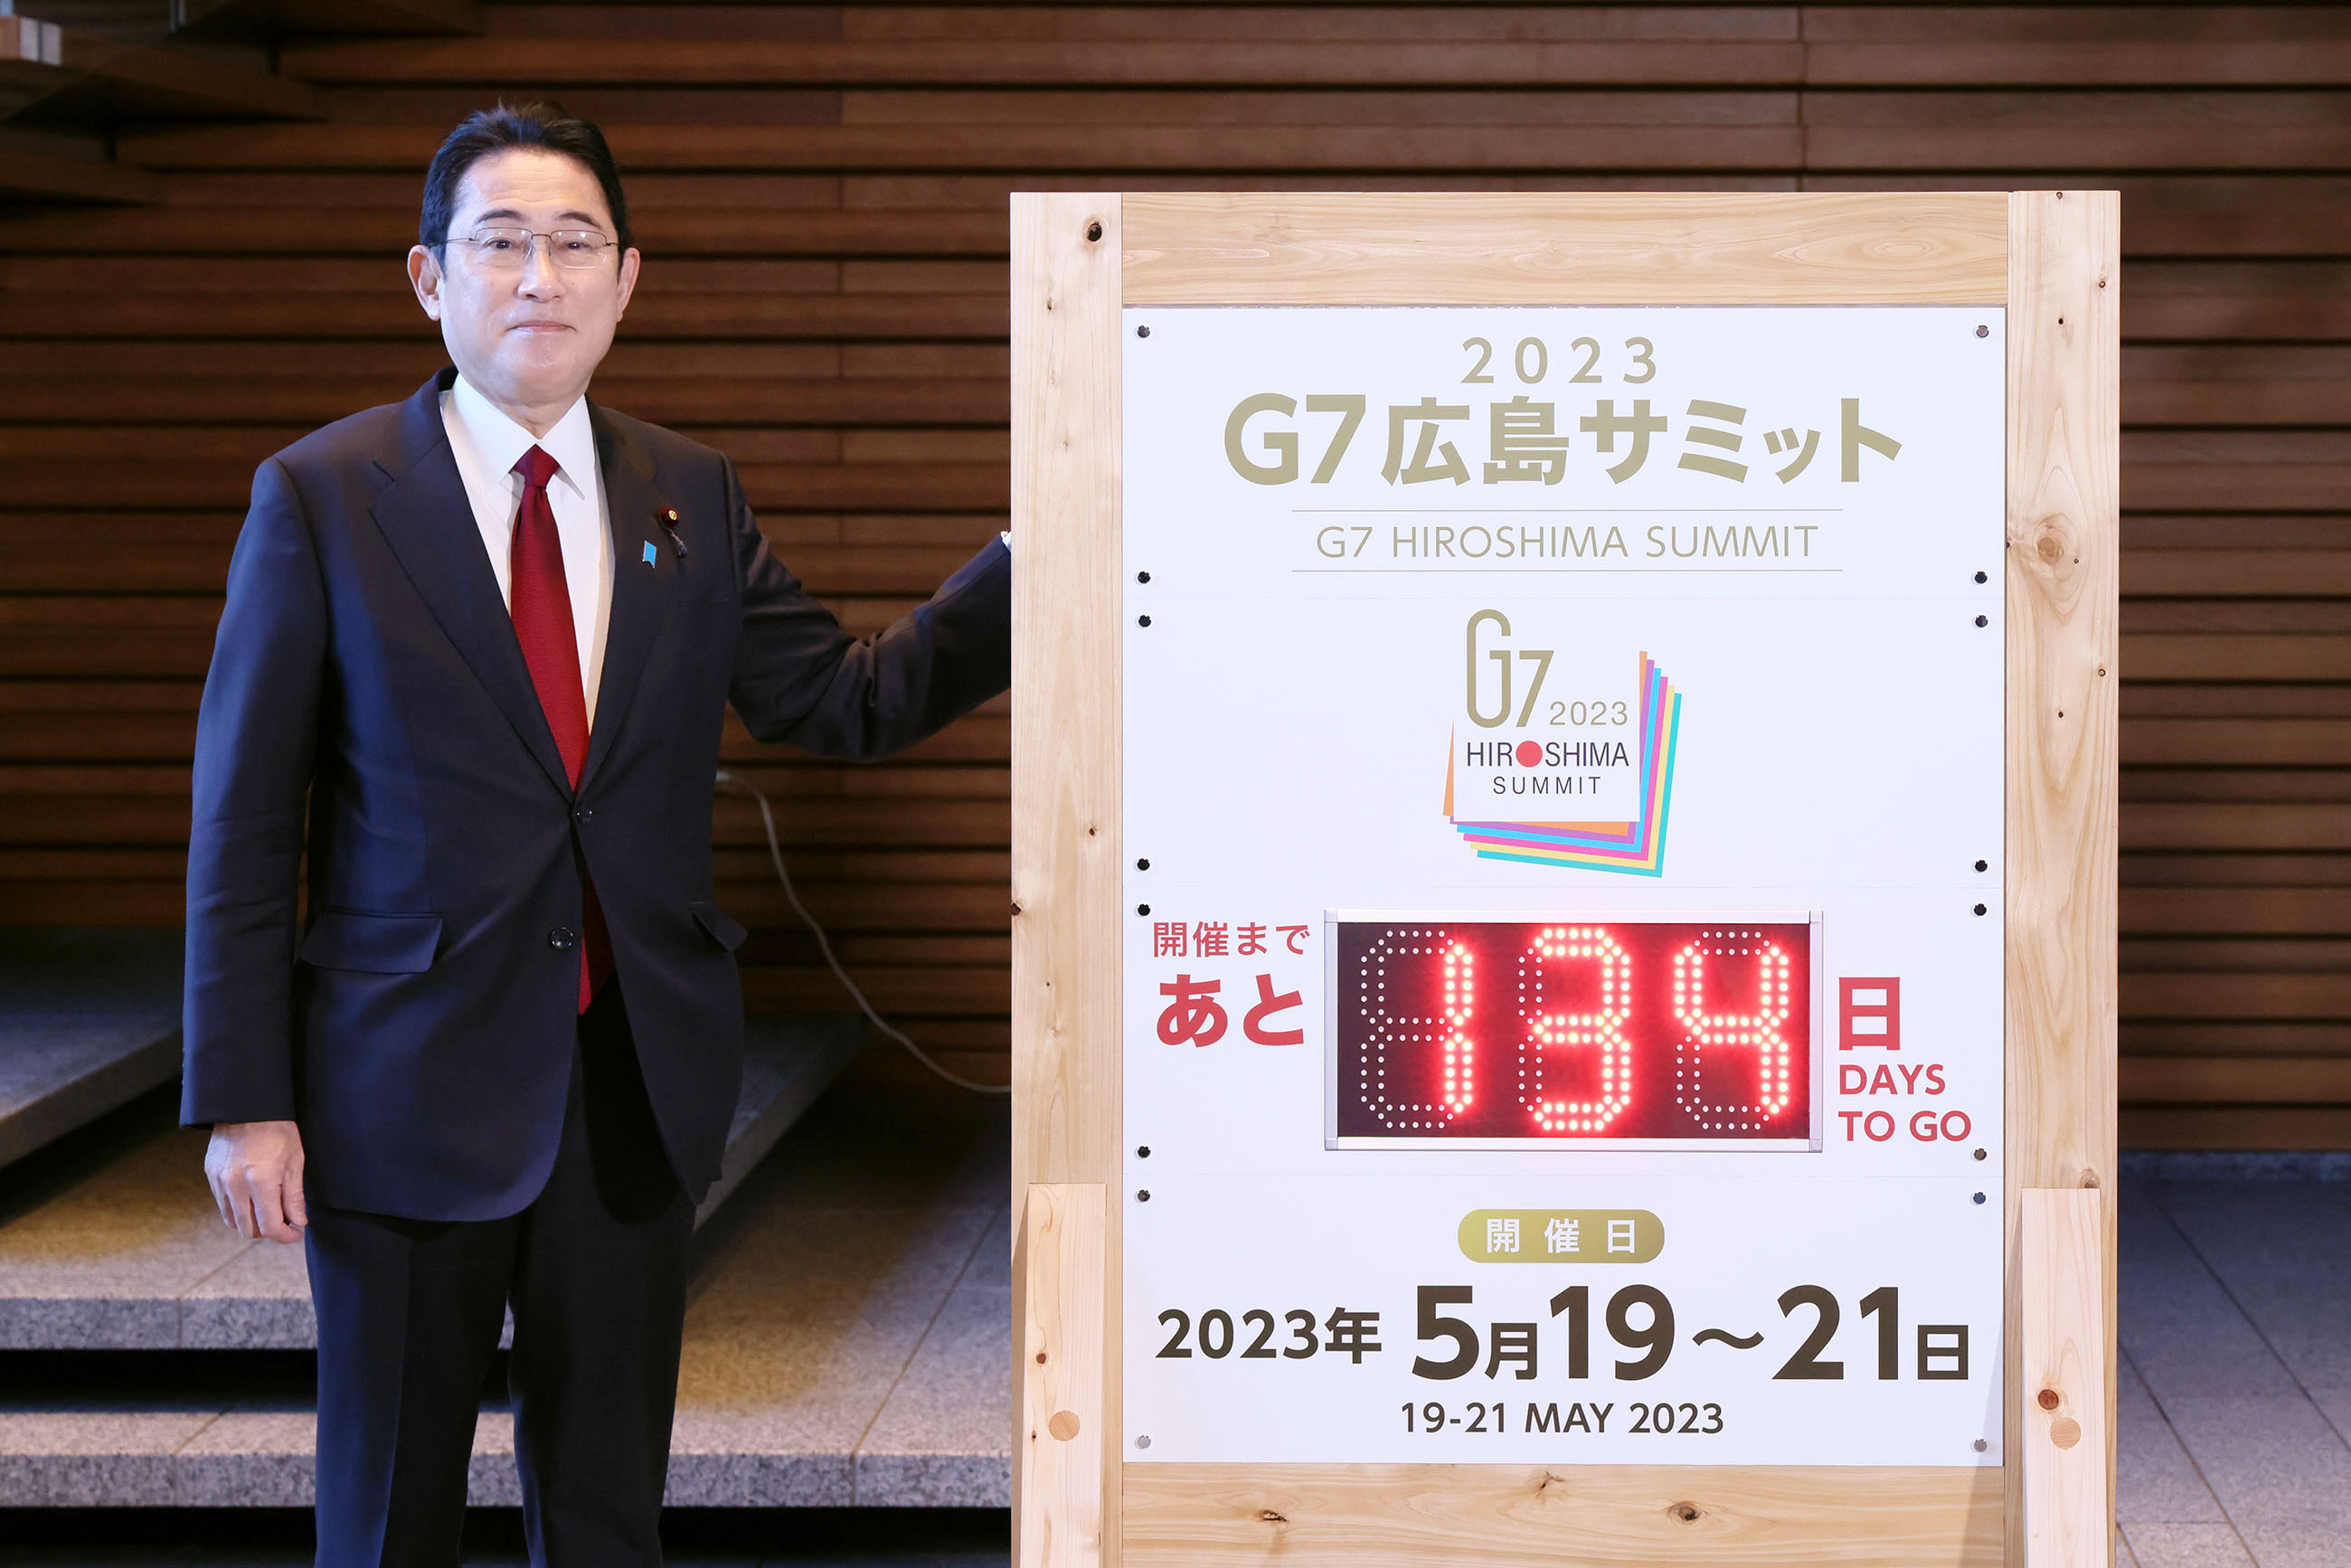 Display of a Countdown Board for the G7 Hiroshima Summit